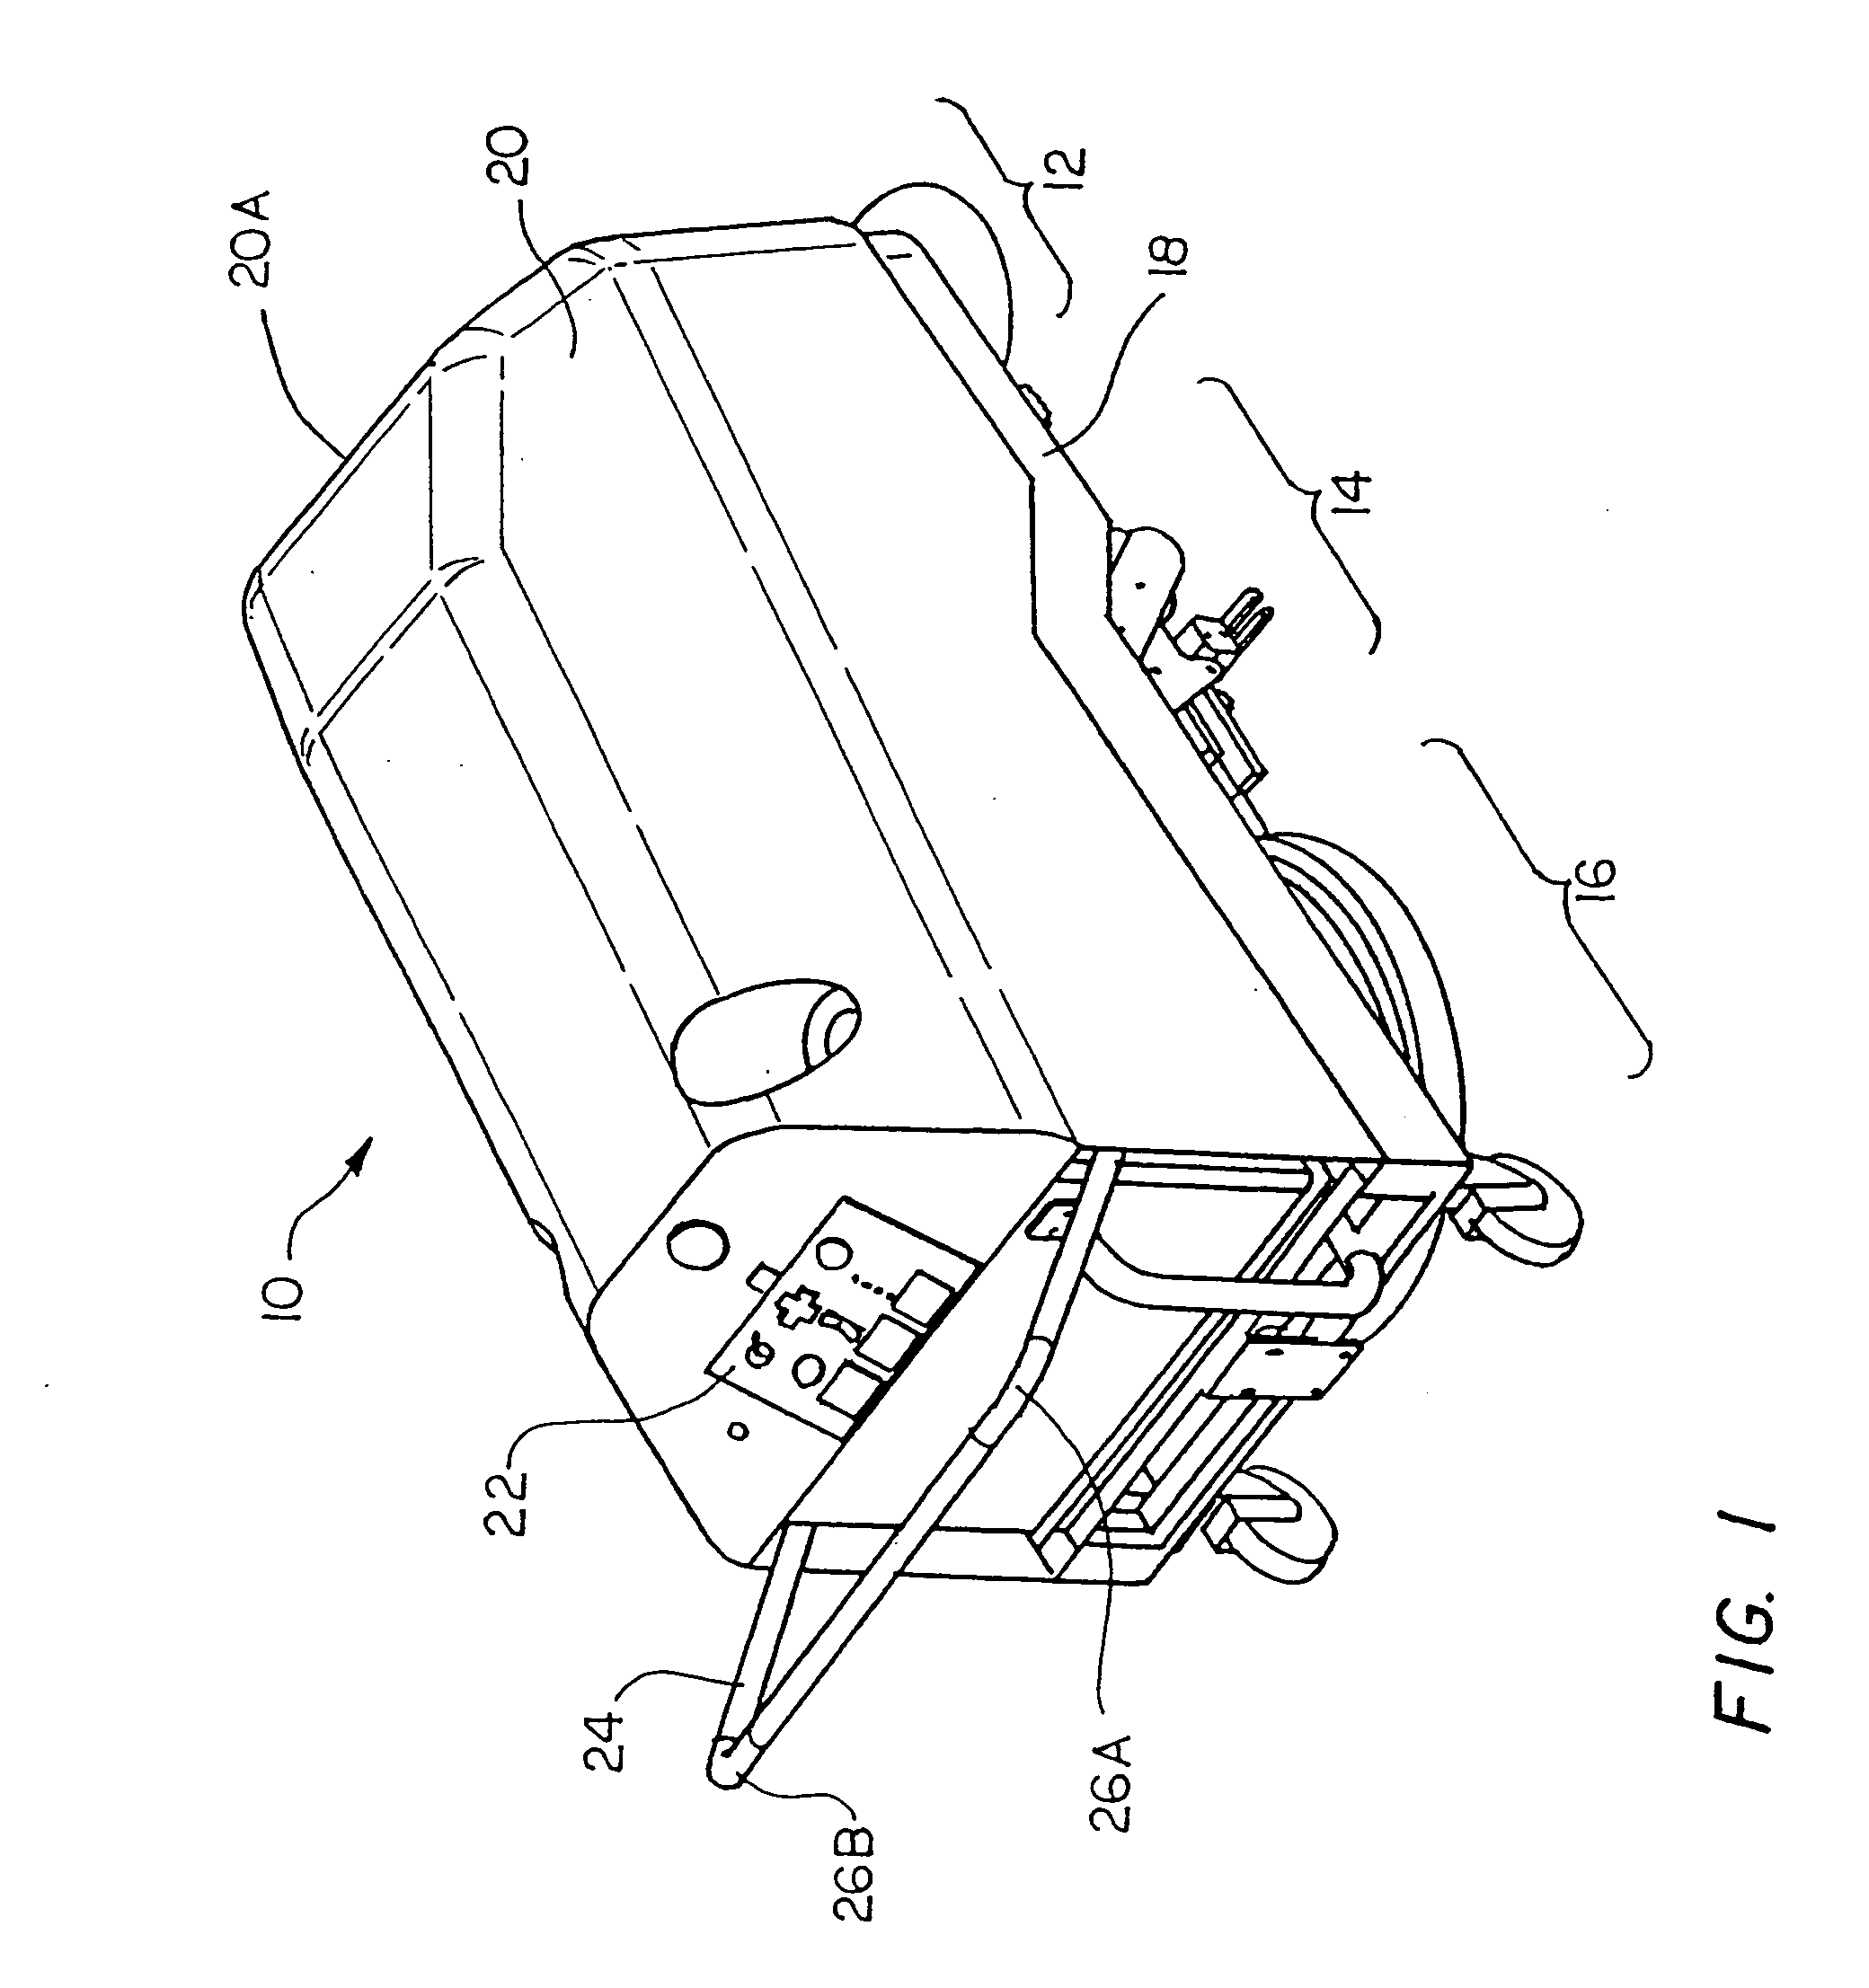 Floor cleaning apparatus with control circuitry